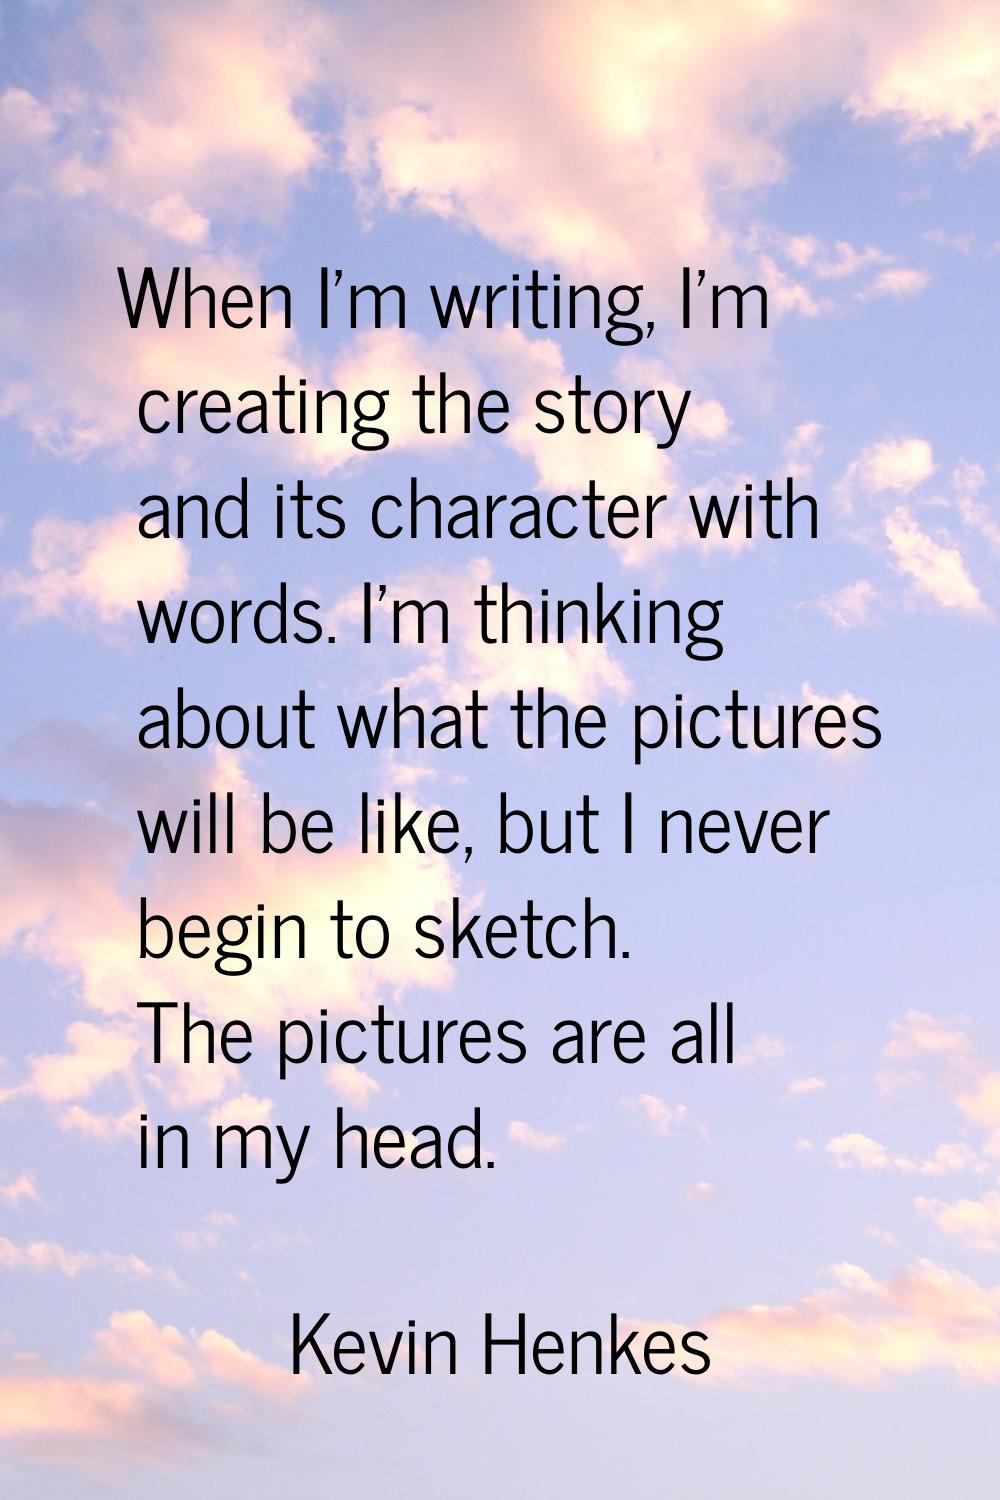 When I'm writing, I'm creating the story and its character with words. I'm thinking about what the 